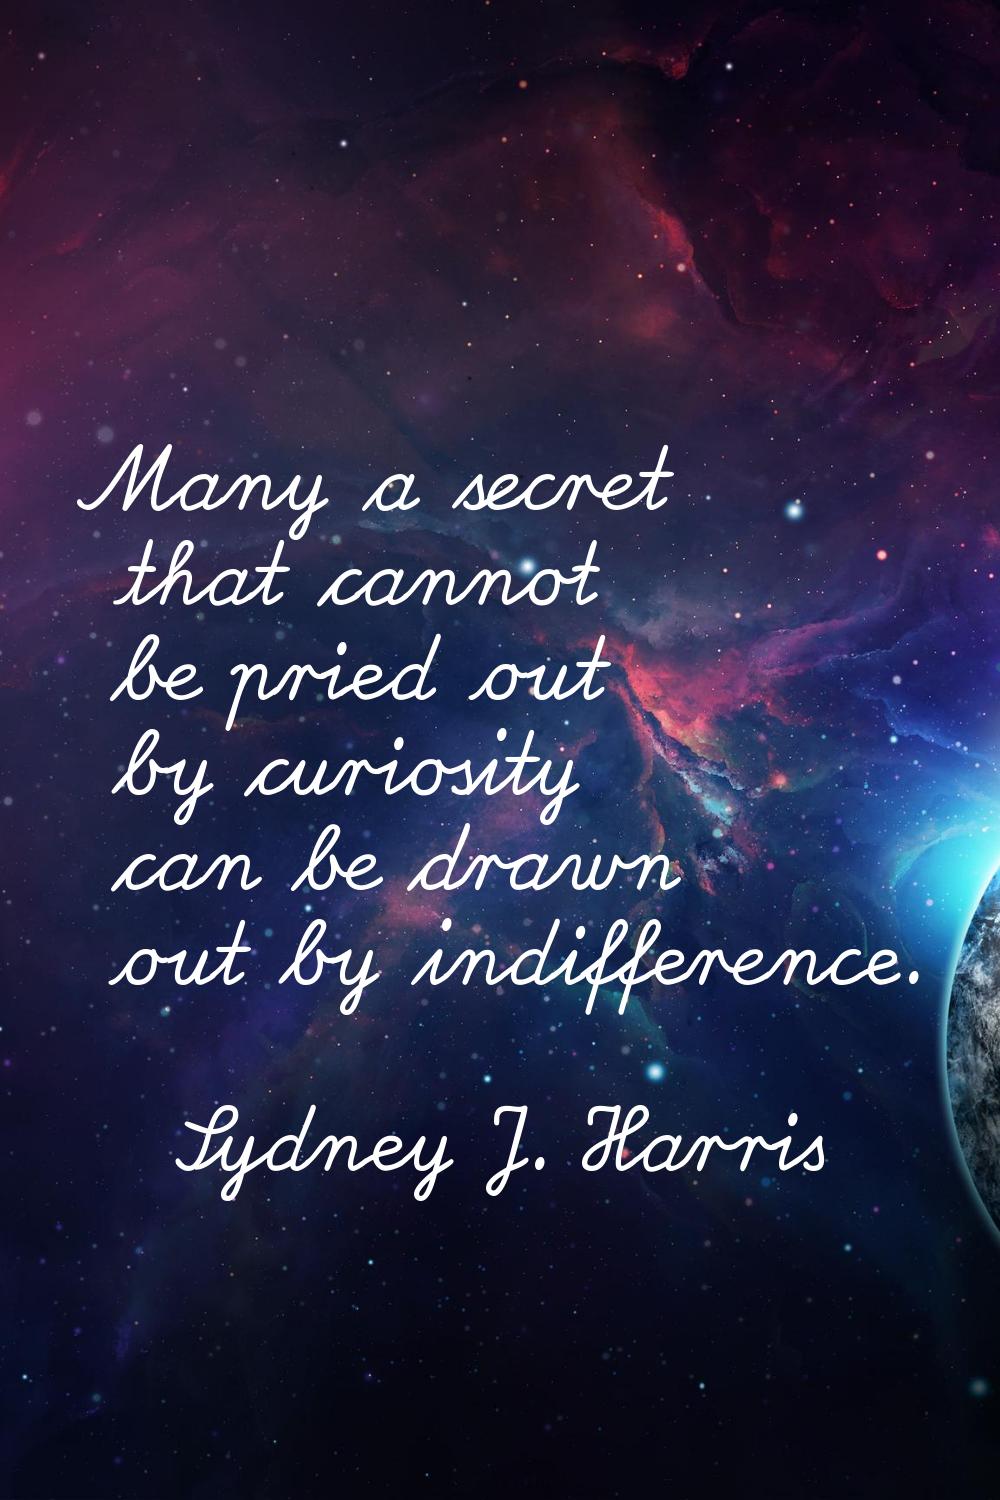 Many a secret that cannot be pried out by curiosity can be drawn out by indifference.